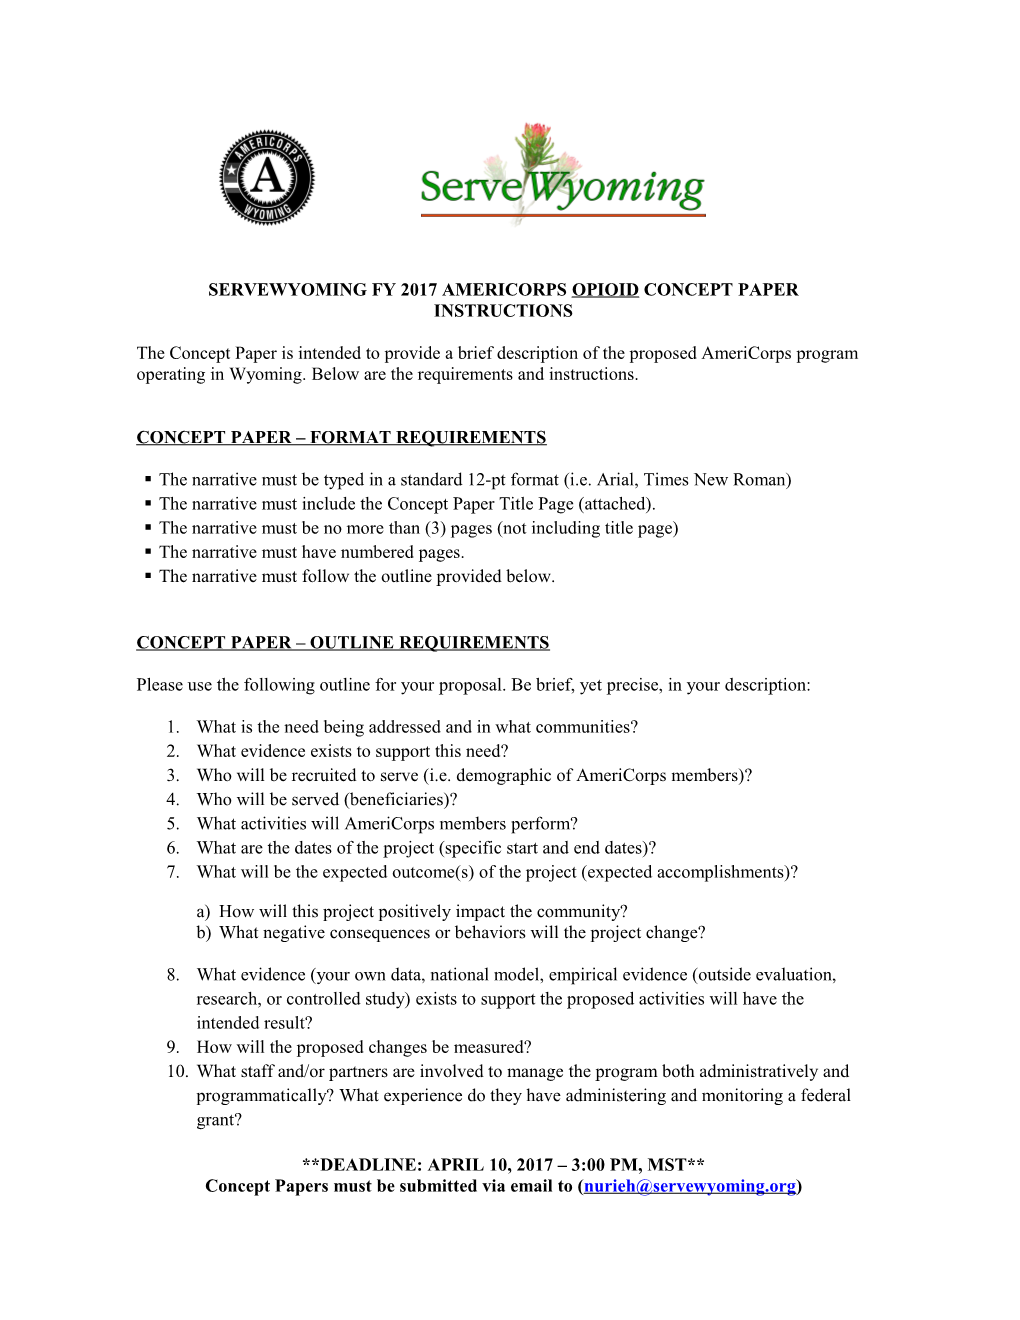 Servewyoming Fy 2017 Americorps Opioid Concept Paper Instructions